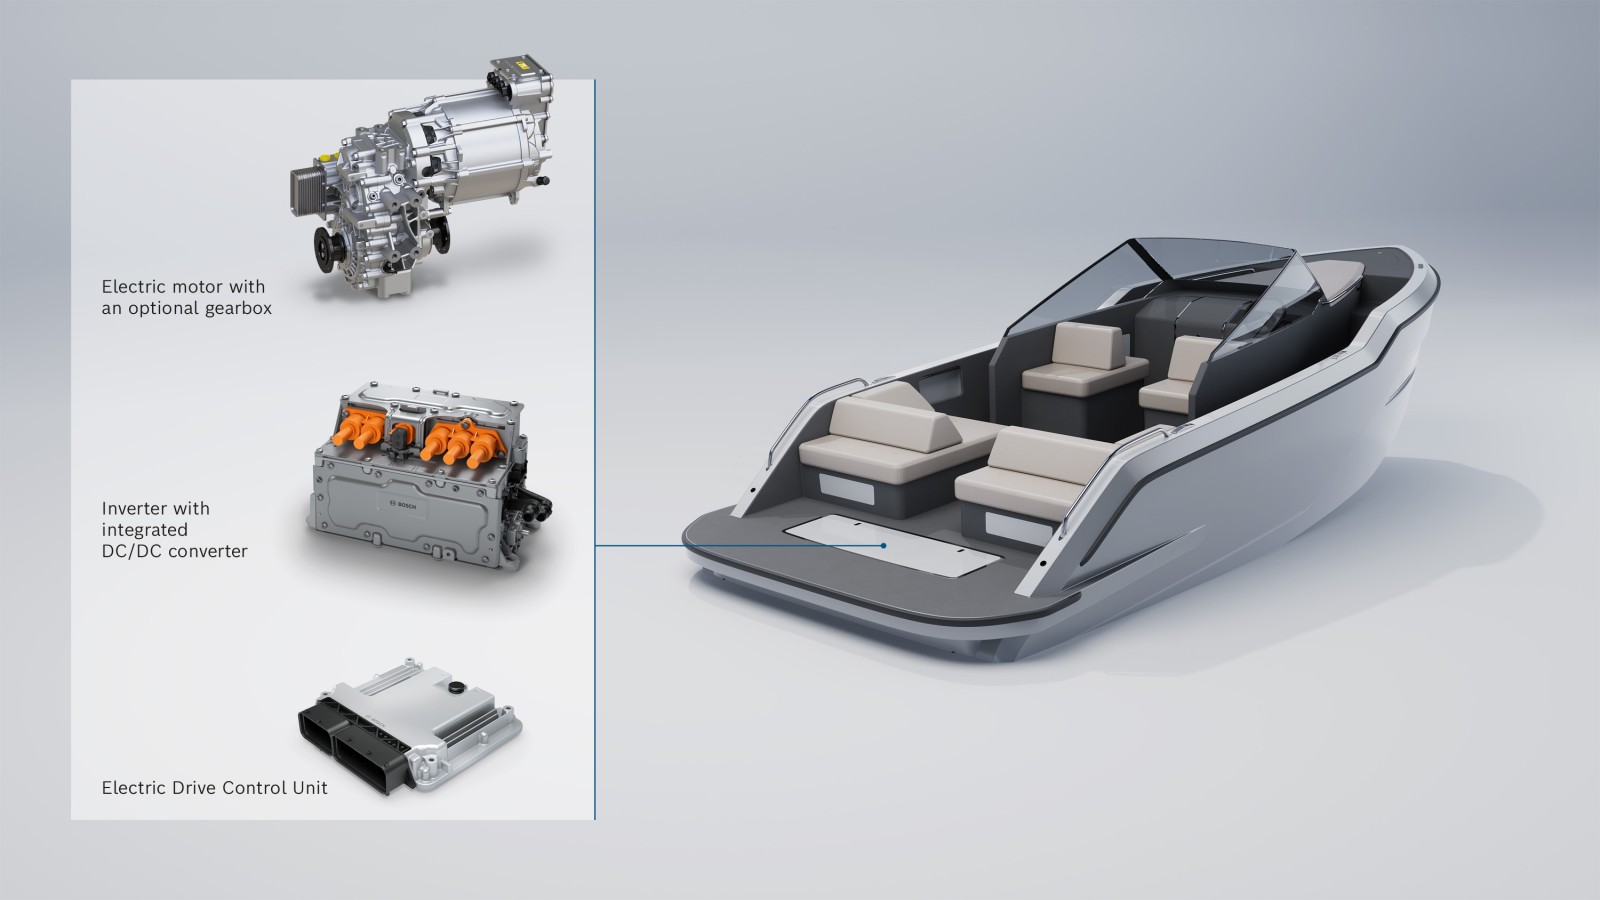 Bosch Showcases Cutting-Edge Electric Drive Solutions for Maritime Industry at Venice Boat Show